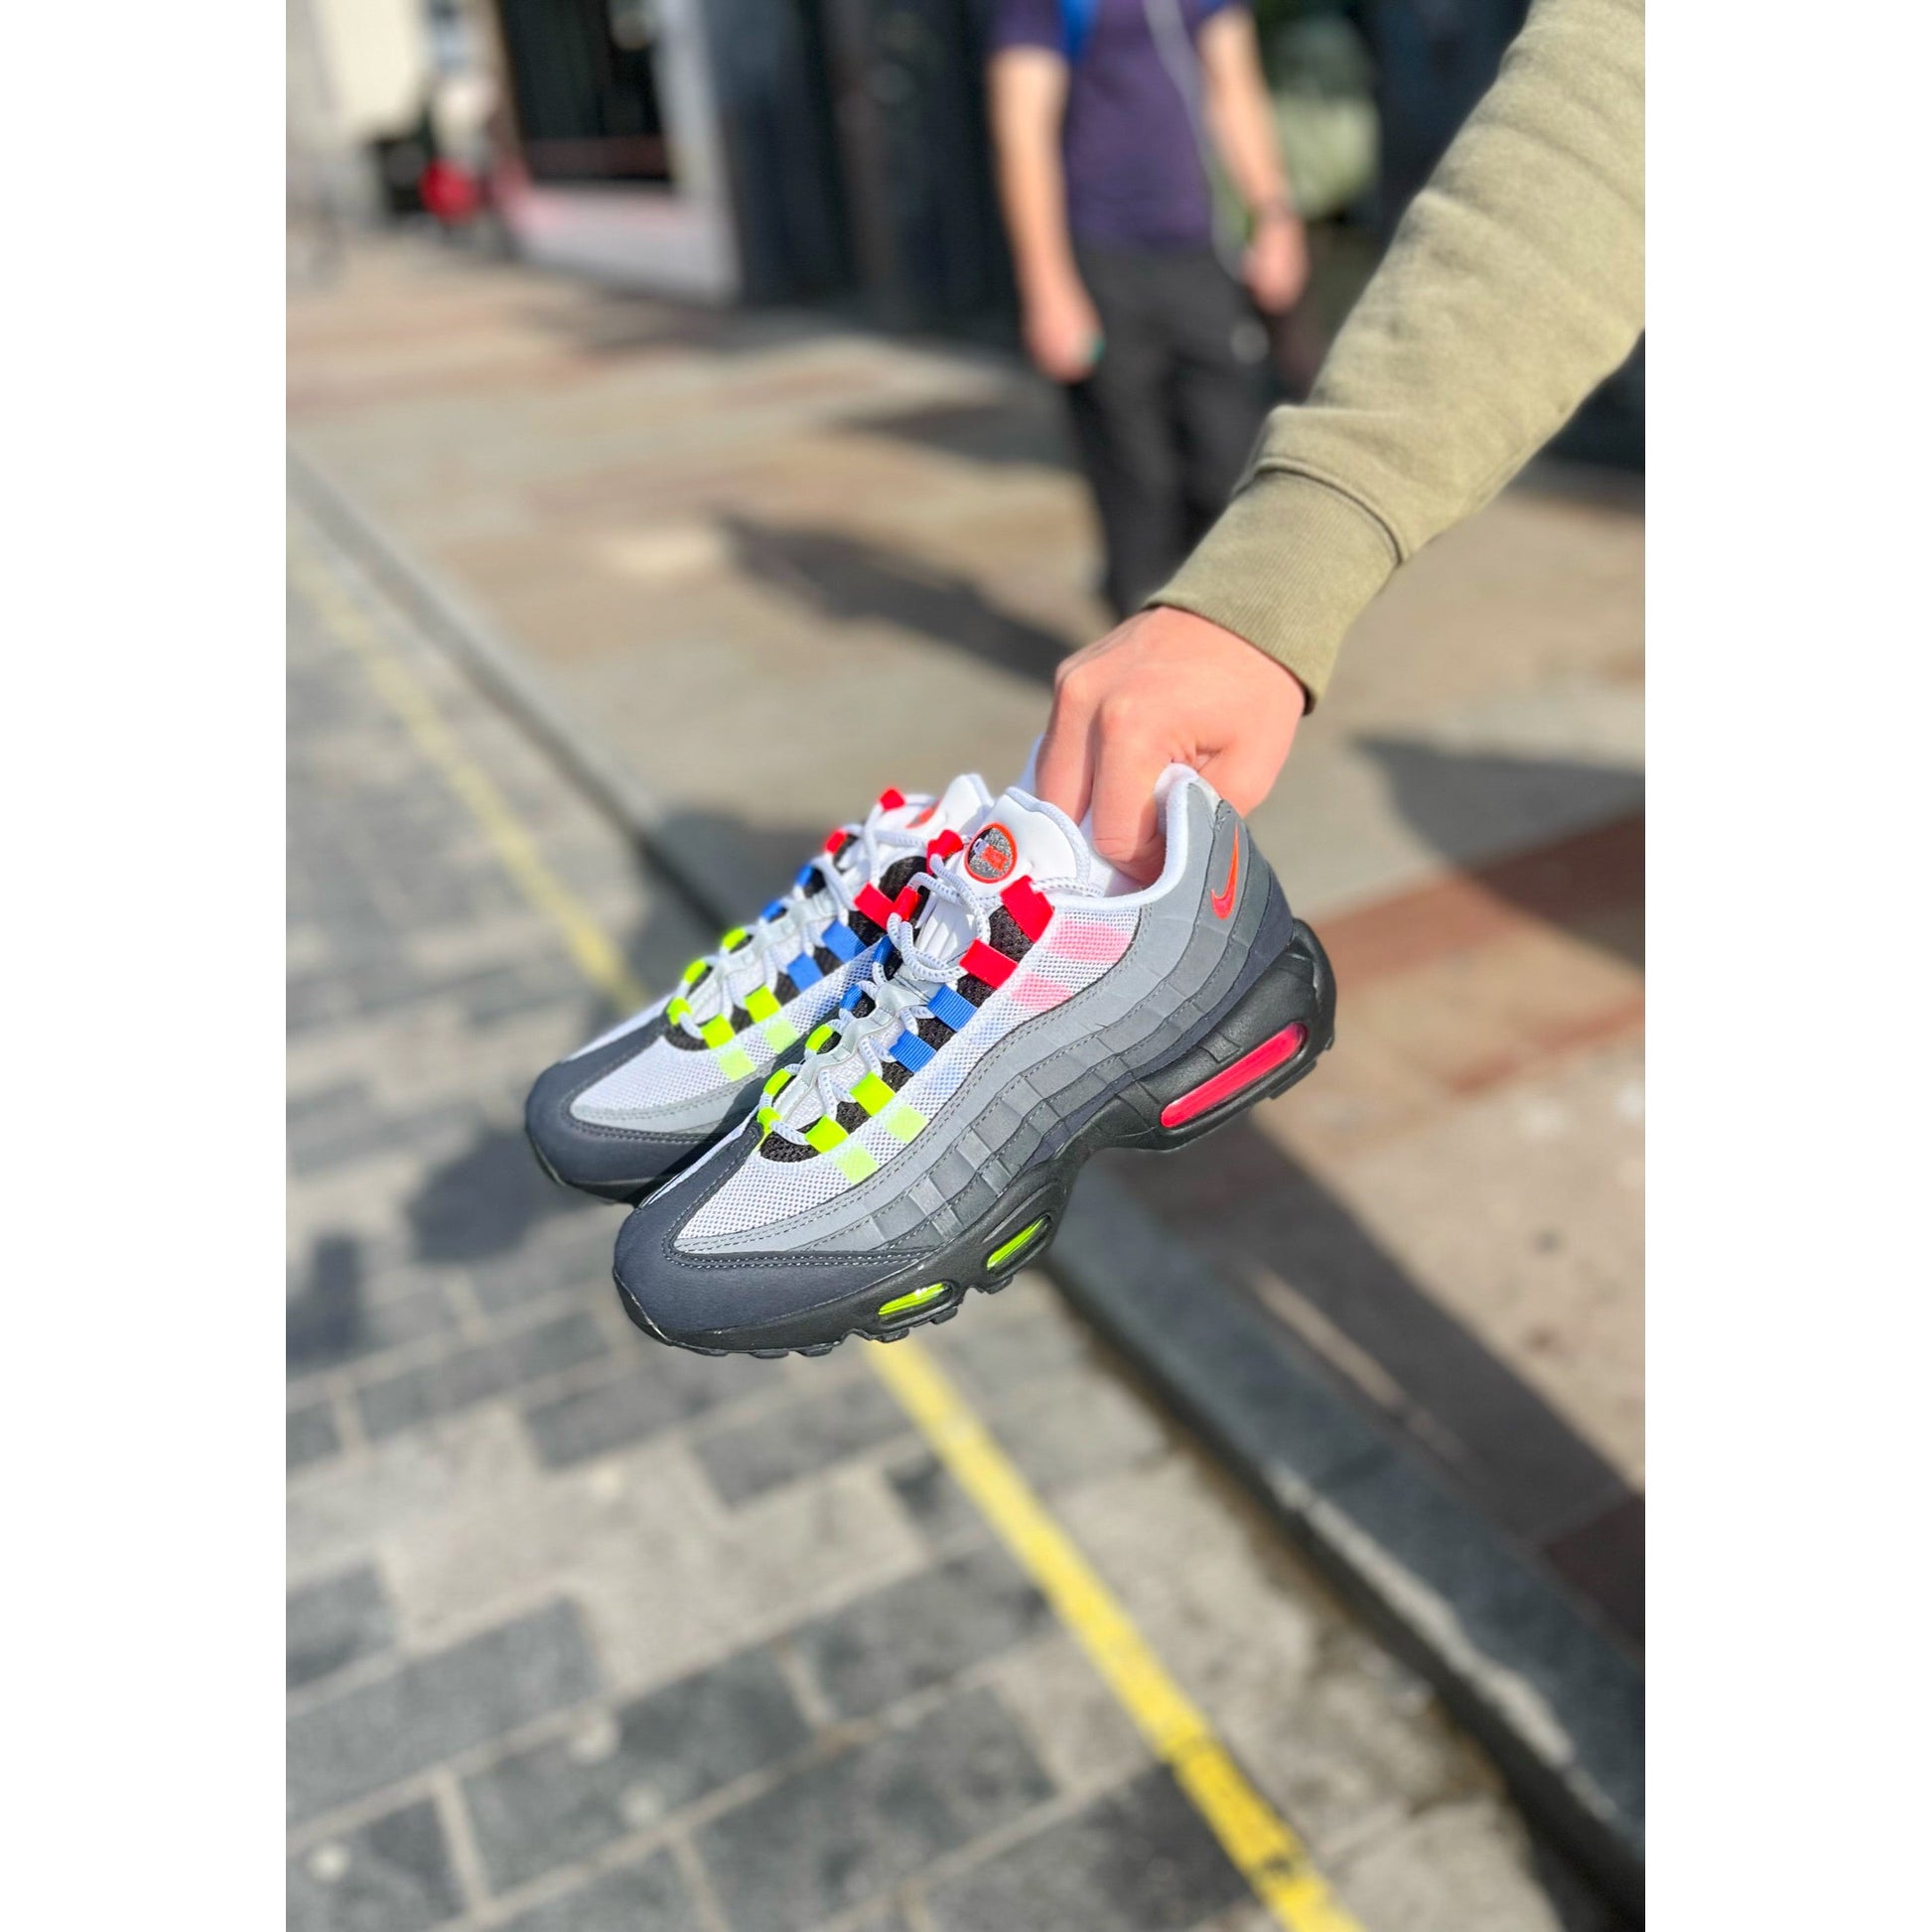 Nike Air Max 95 Greedy 3.0 by Nike from £400.00